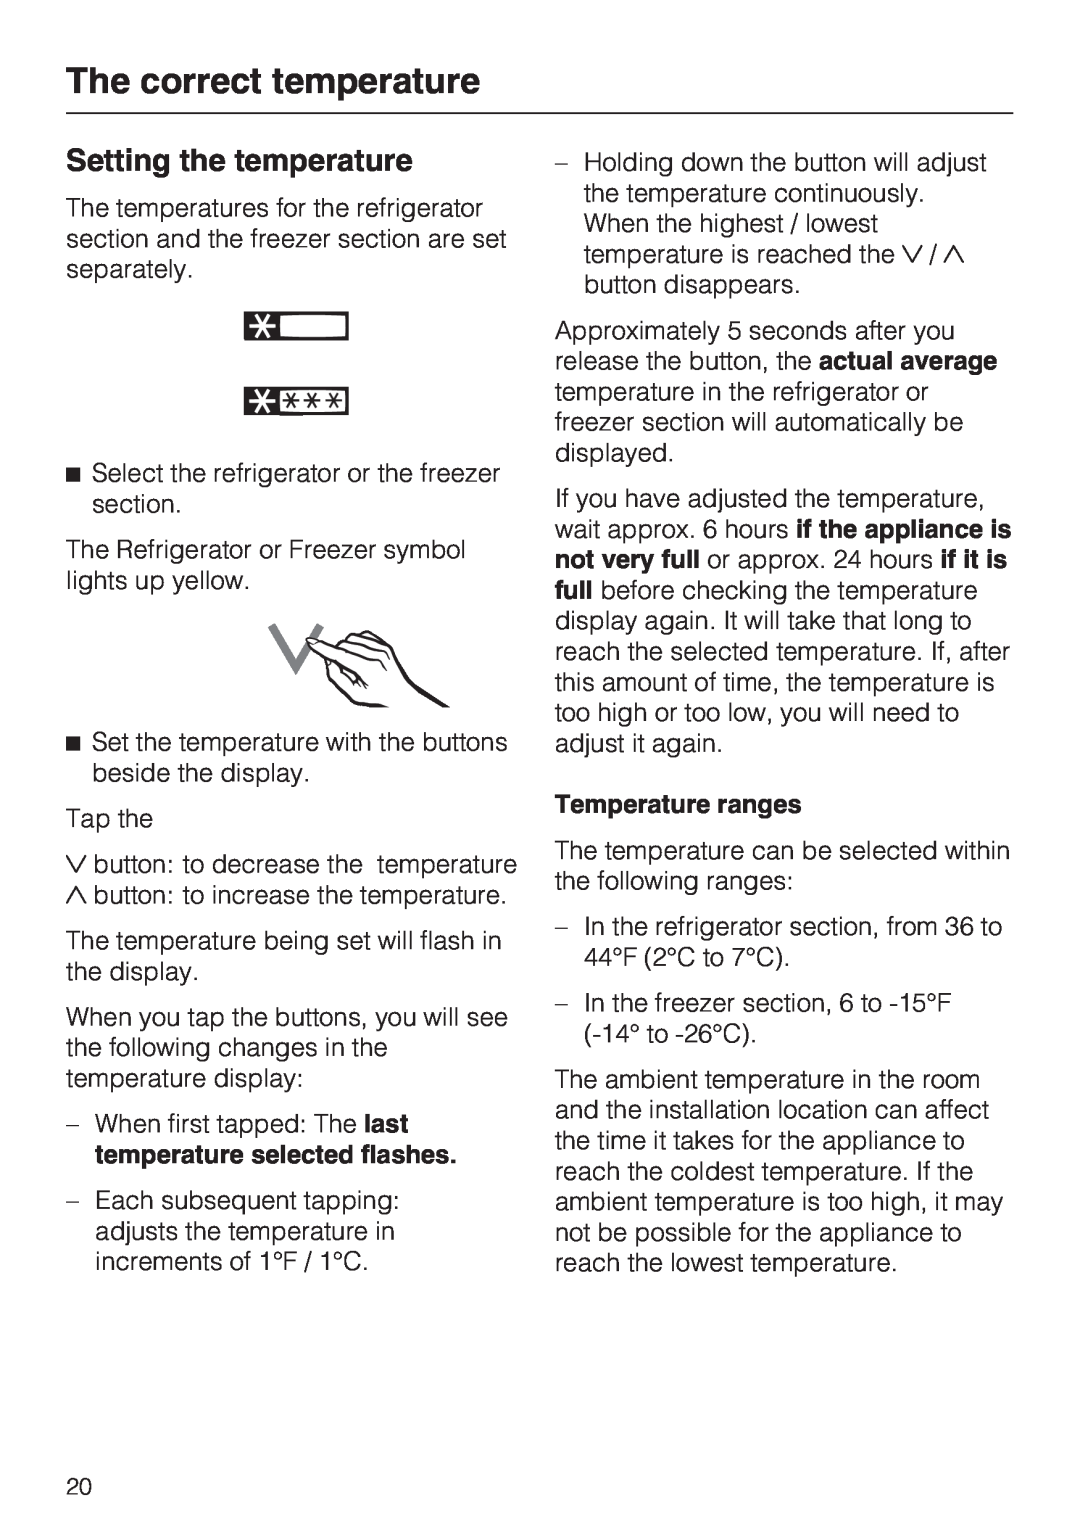 Miele KFN 14943 SDE ED installation instructions Setting the temperature, Temperature ranges, The correct temperature 